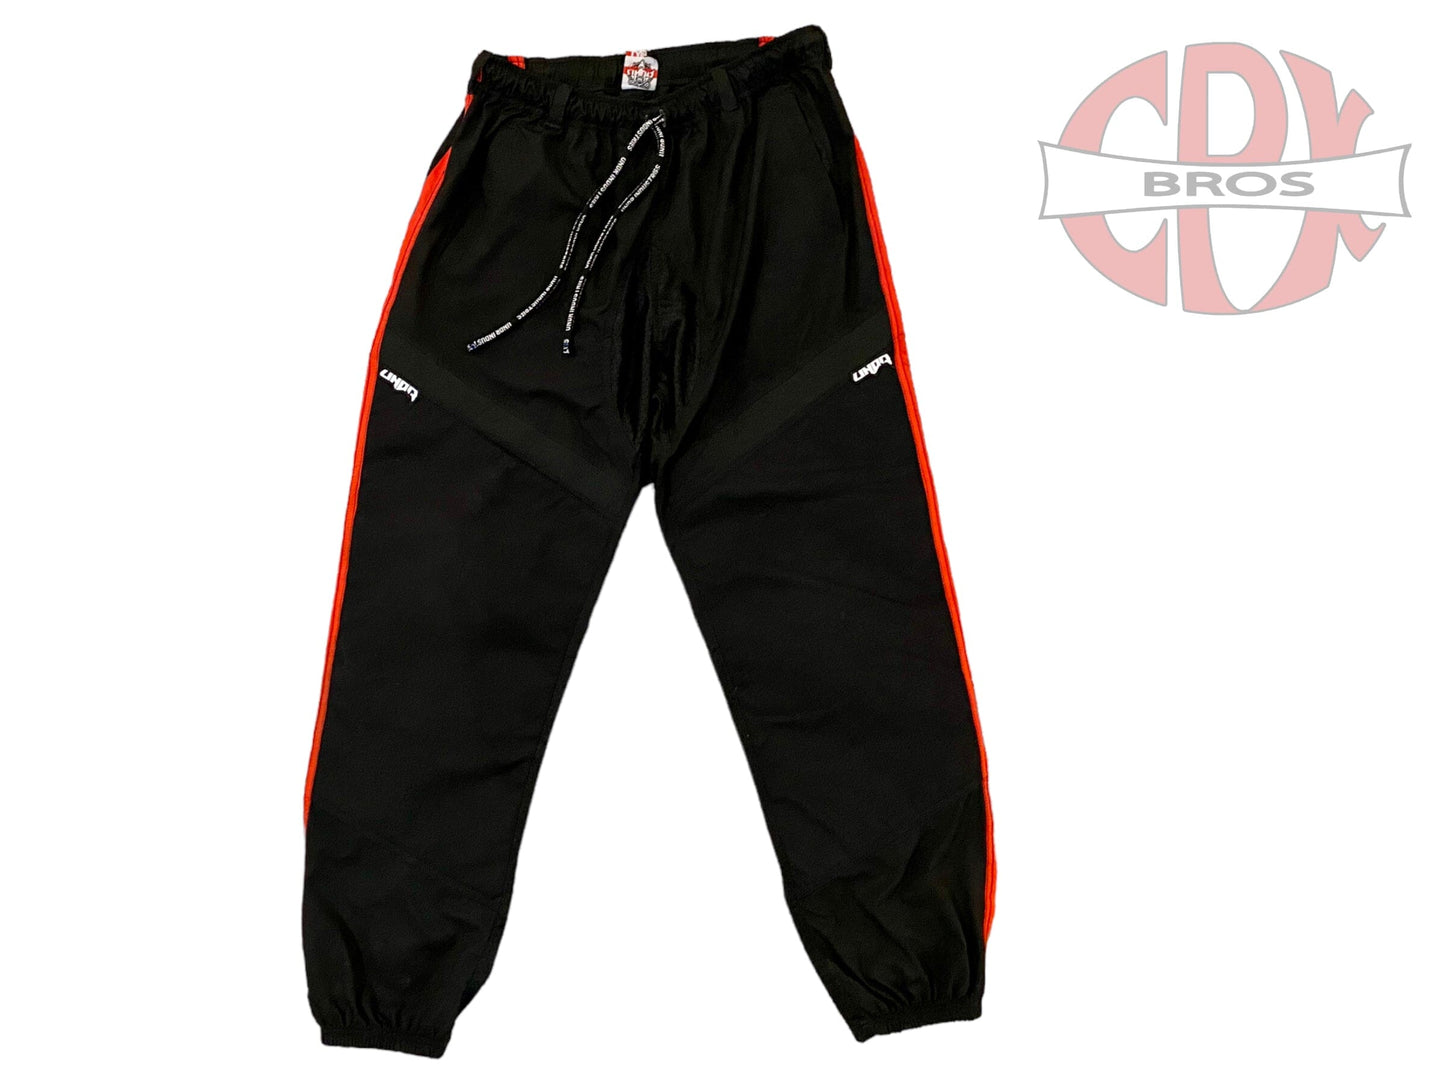 Used UNDR Jogger Style Paintball Pants-size L Paintball Gun from CPXBrosPaintball Buy/Sell/Trade Paintball Markers, Paintball Hoppers, Paintball Masks, and Hormesis Headbands